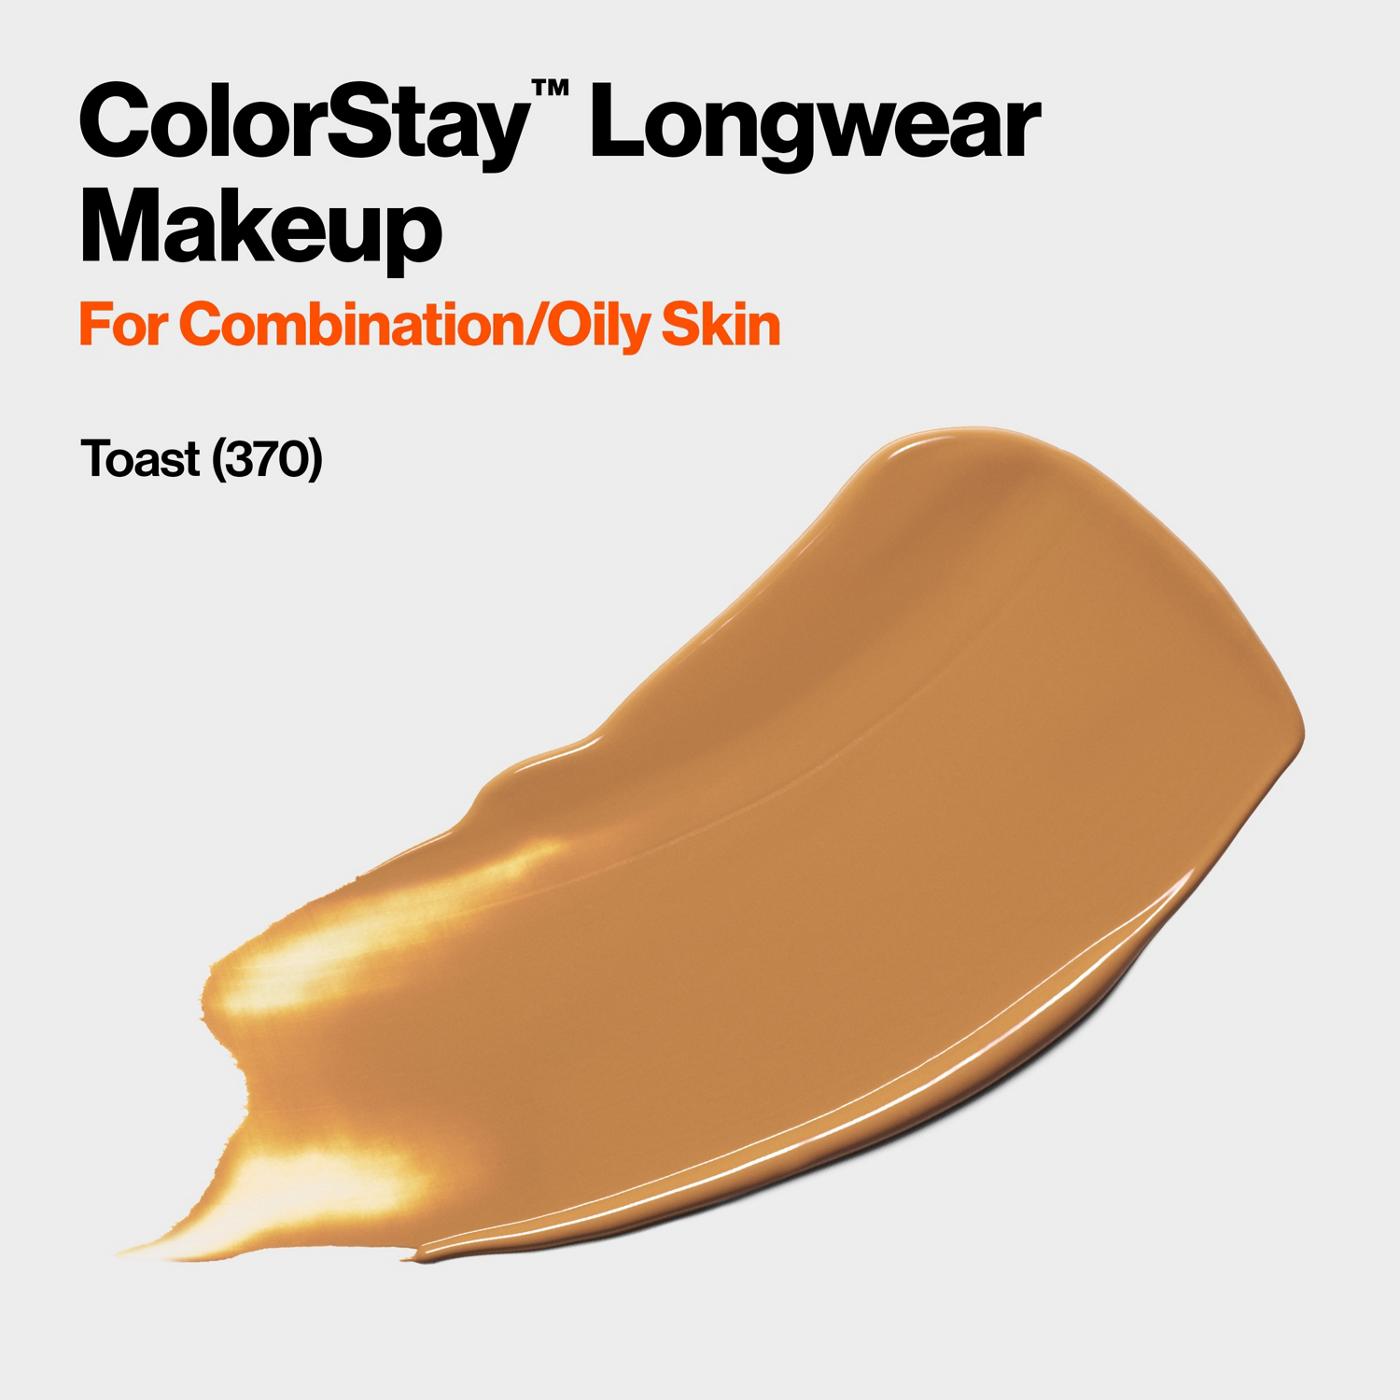 Revlon ColorStay Foundation for Combination/Oily Skin, 370 Toast; image 5 of 6